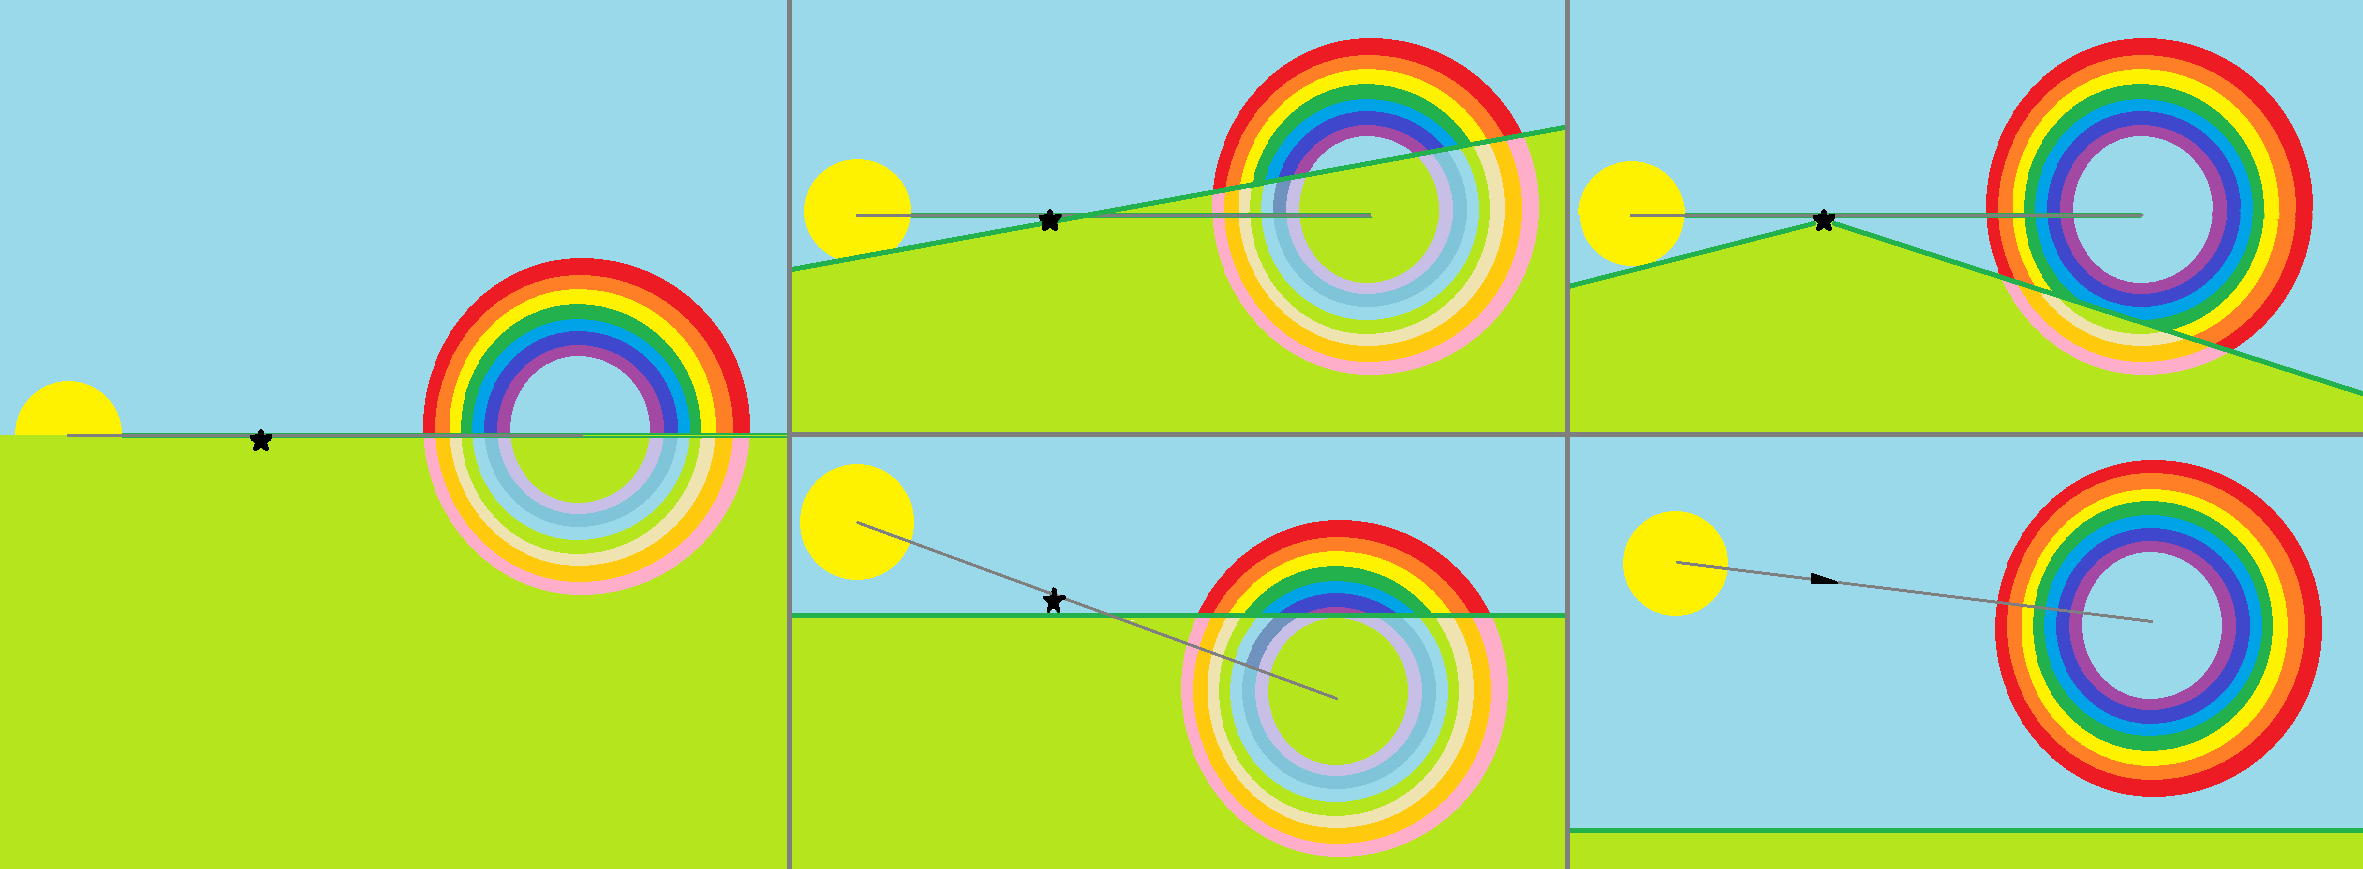 simple diagram showing the sun, viewer, and rainbow in five different senarios. 1: the sun and observer are at the horizon, showing half of a full rainbow. 2: the ground slopes upwards from the viewer, obscuring more than half the rainbow. 3: the viewer ontop a mountain, allowing more than half the rainbow to be seen. 4: the sun higher in the sky and the viewer on flat land, with less than half the rainbow visable. 5: The viewer in an airplane, allowing the full rainbow to be seen